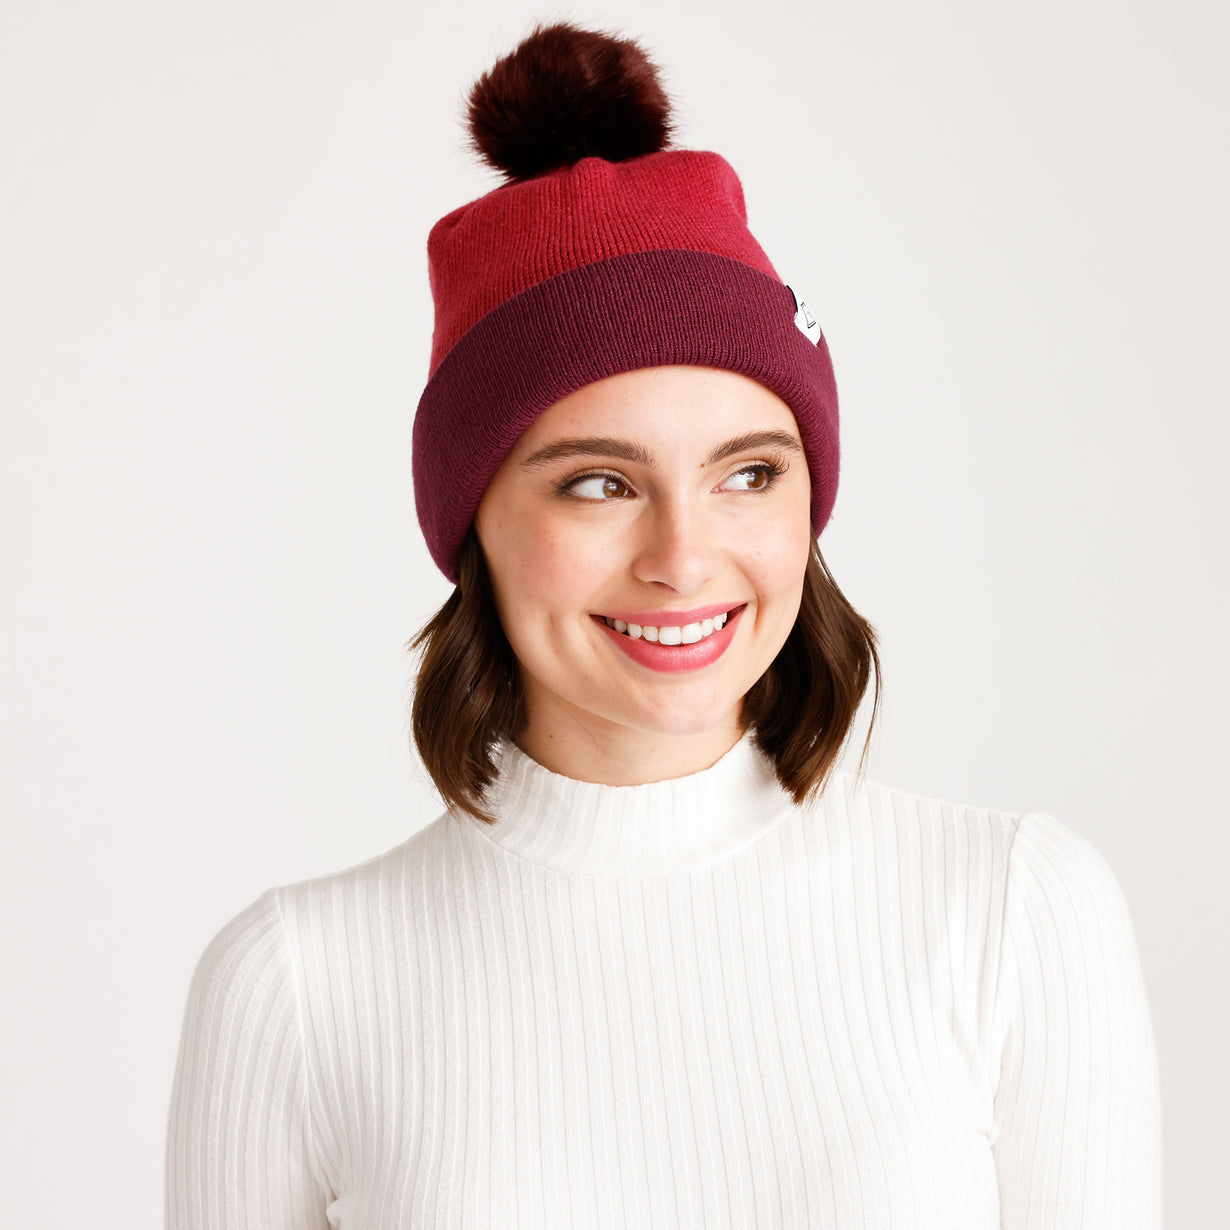 Vera Bradley® - Solid Knit Pom Beanie In Cranberry Red - On model